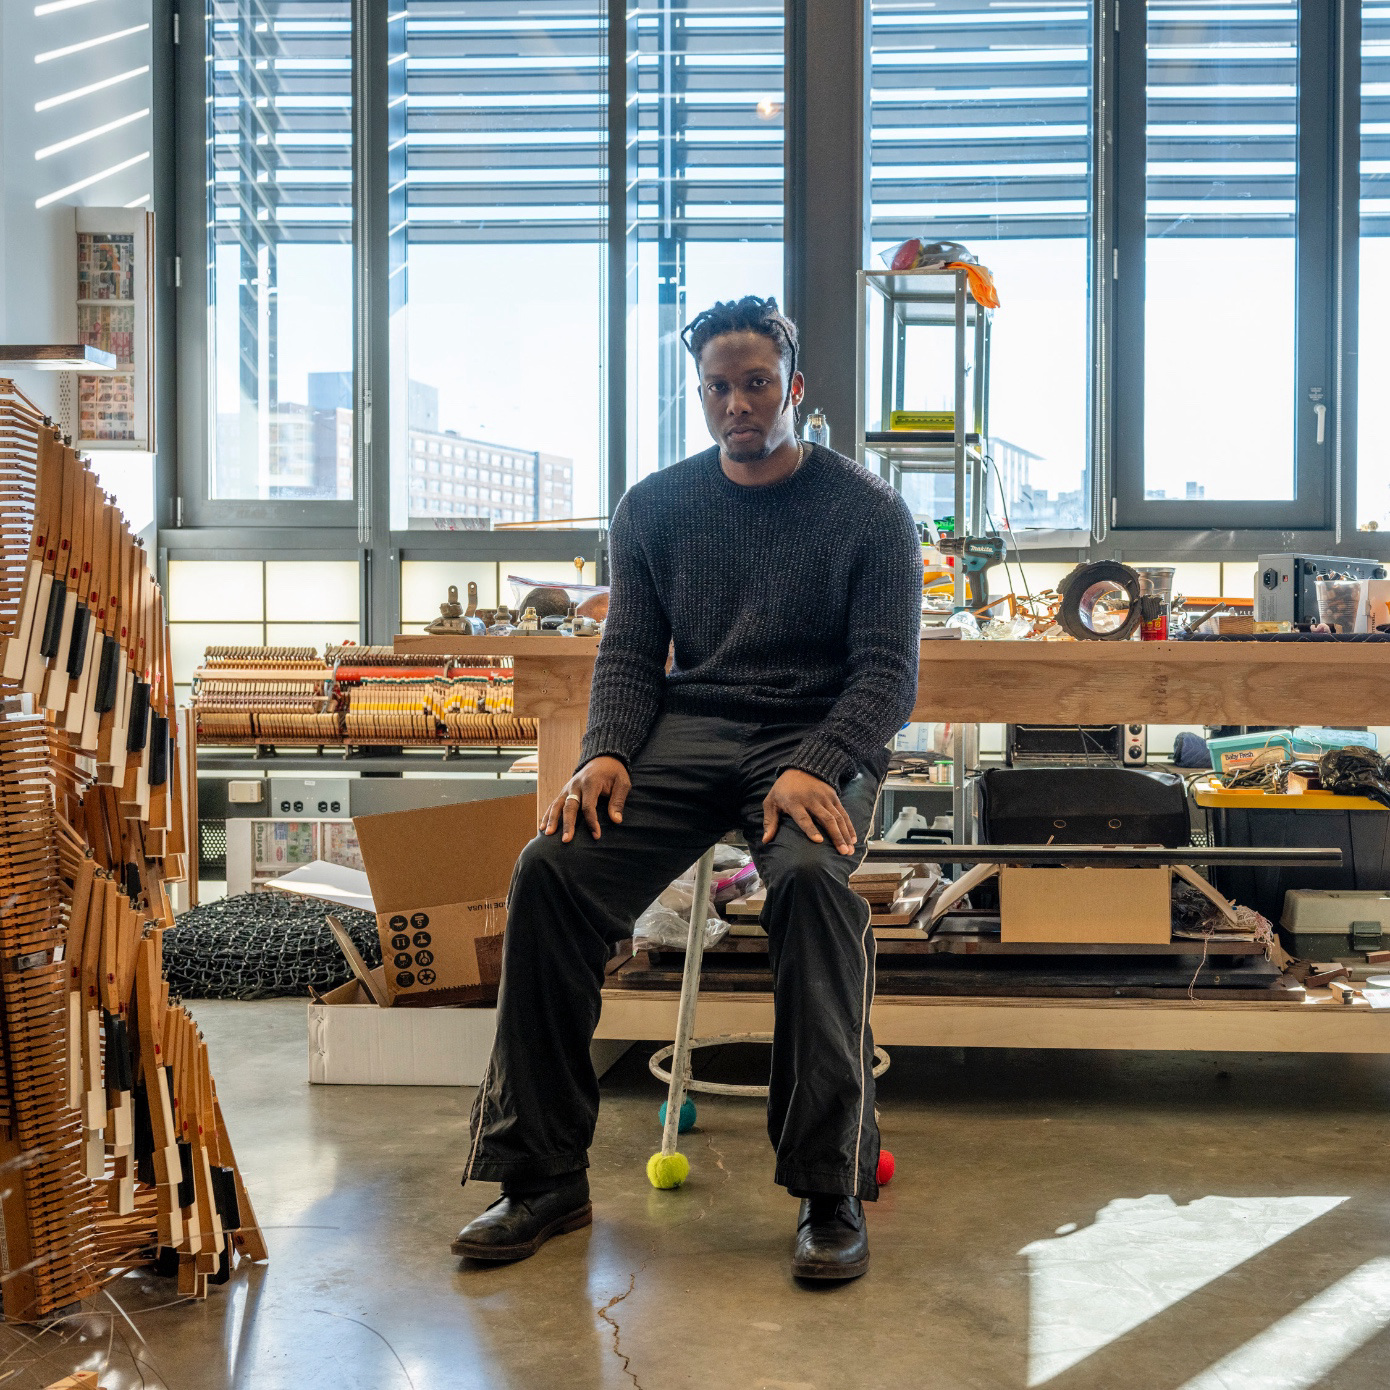 For His First New York Solo Show, Artist Gozié Ojini Rescued Pianos From the Junkyard. Then He Gutted Them